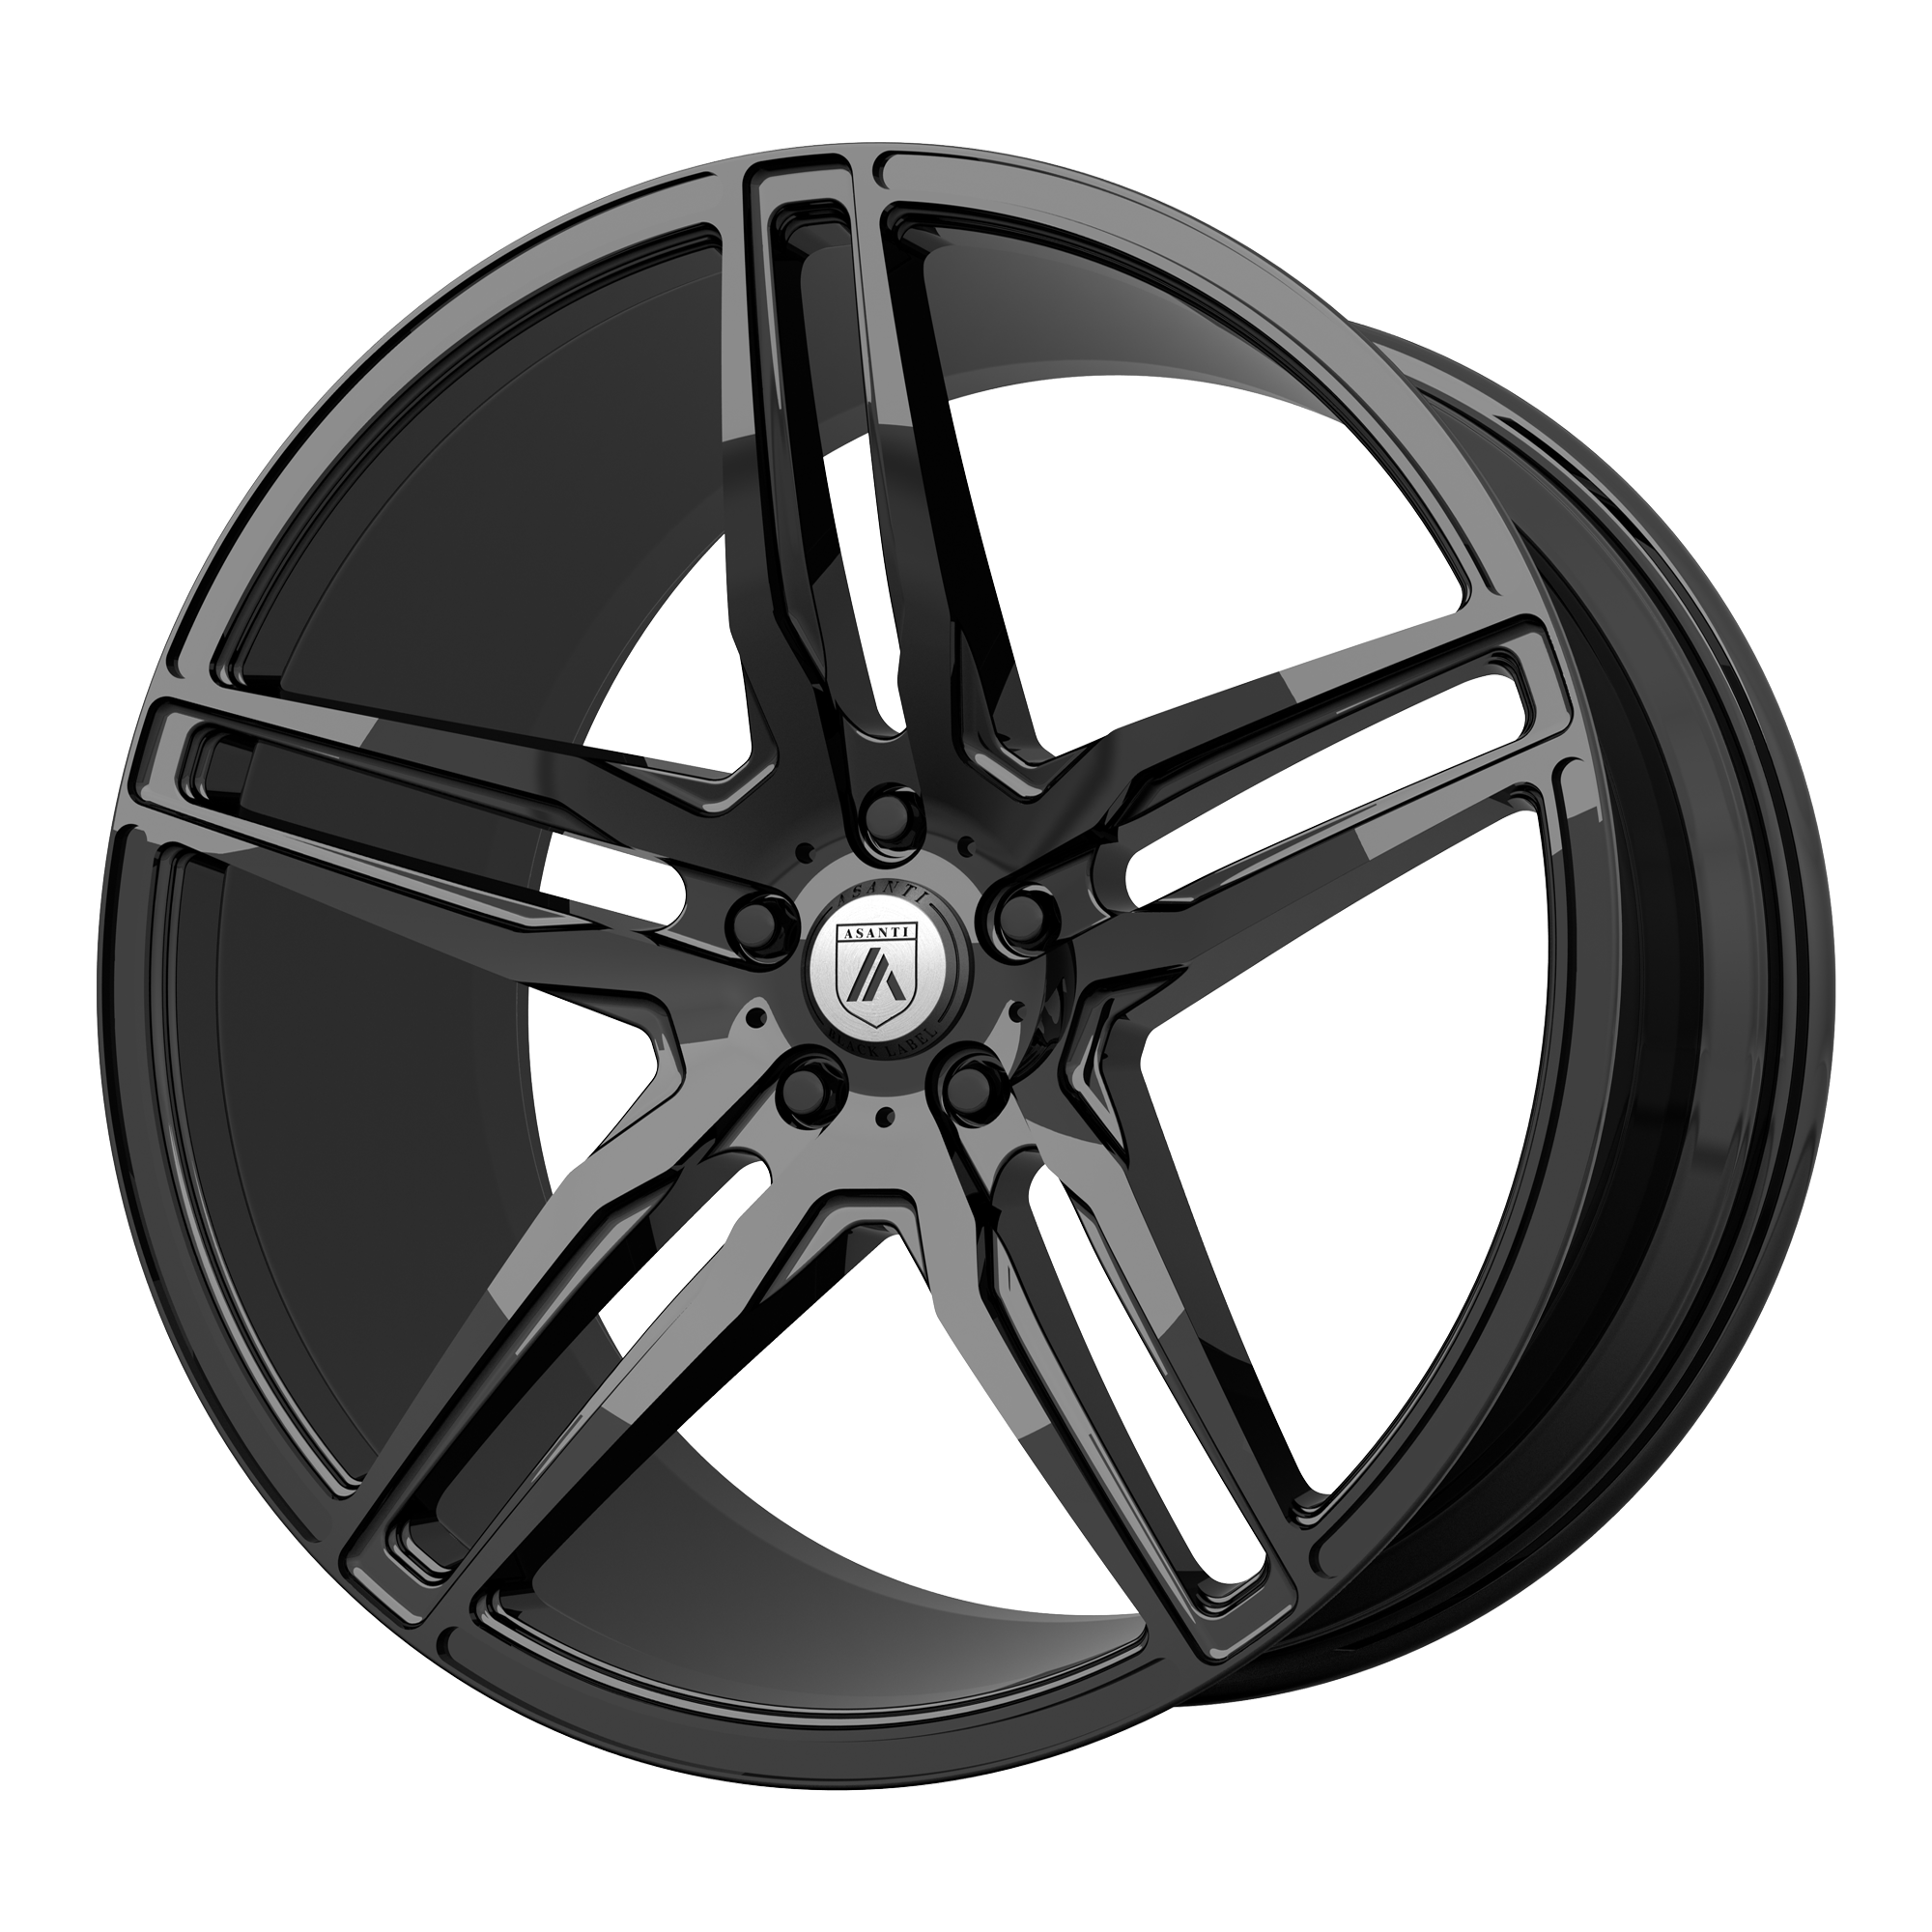 ORION 22x10.5 5x115.00 GLOSS BLACK (25 mm) - Tires and Engine Performance